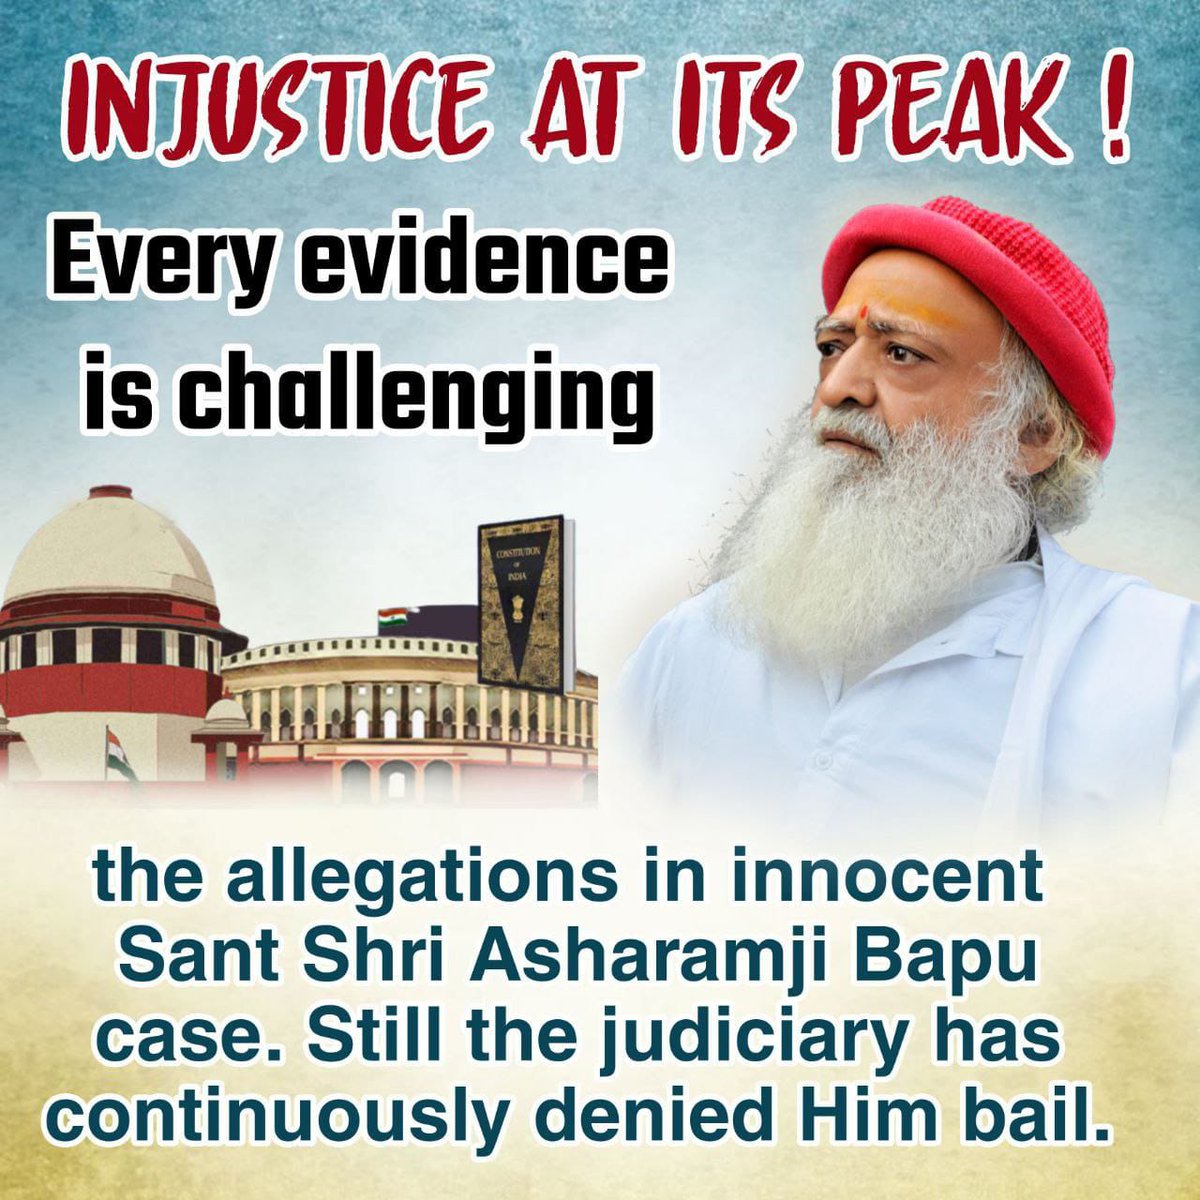 The decision of Jodhpur Session Court on 25 April 2018 embarrassed all humanity. Due to false testimony of a girl under the POCSO Act, Sant Shri Asharamji Bapu was sentenced to Life Imprisonment. Jago Hindu , Unite Against Injustice towards Hindu Saints. #25April_AnyayDiwas